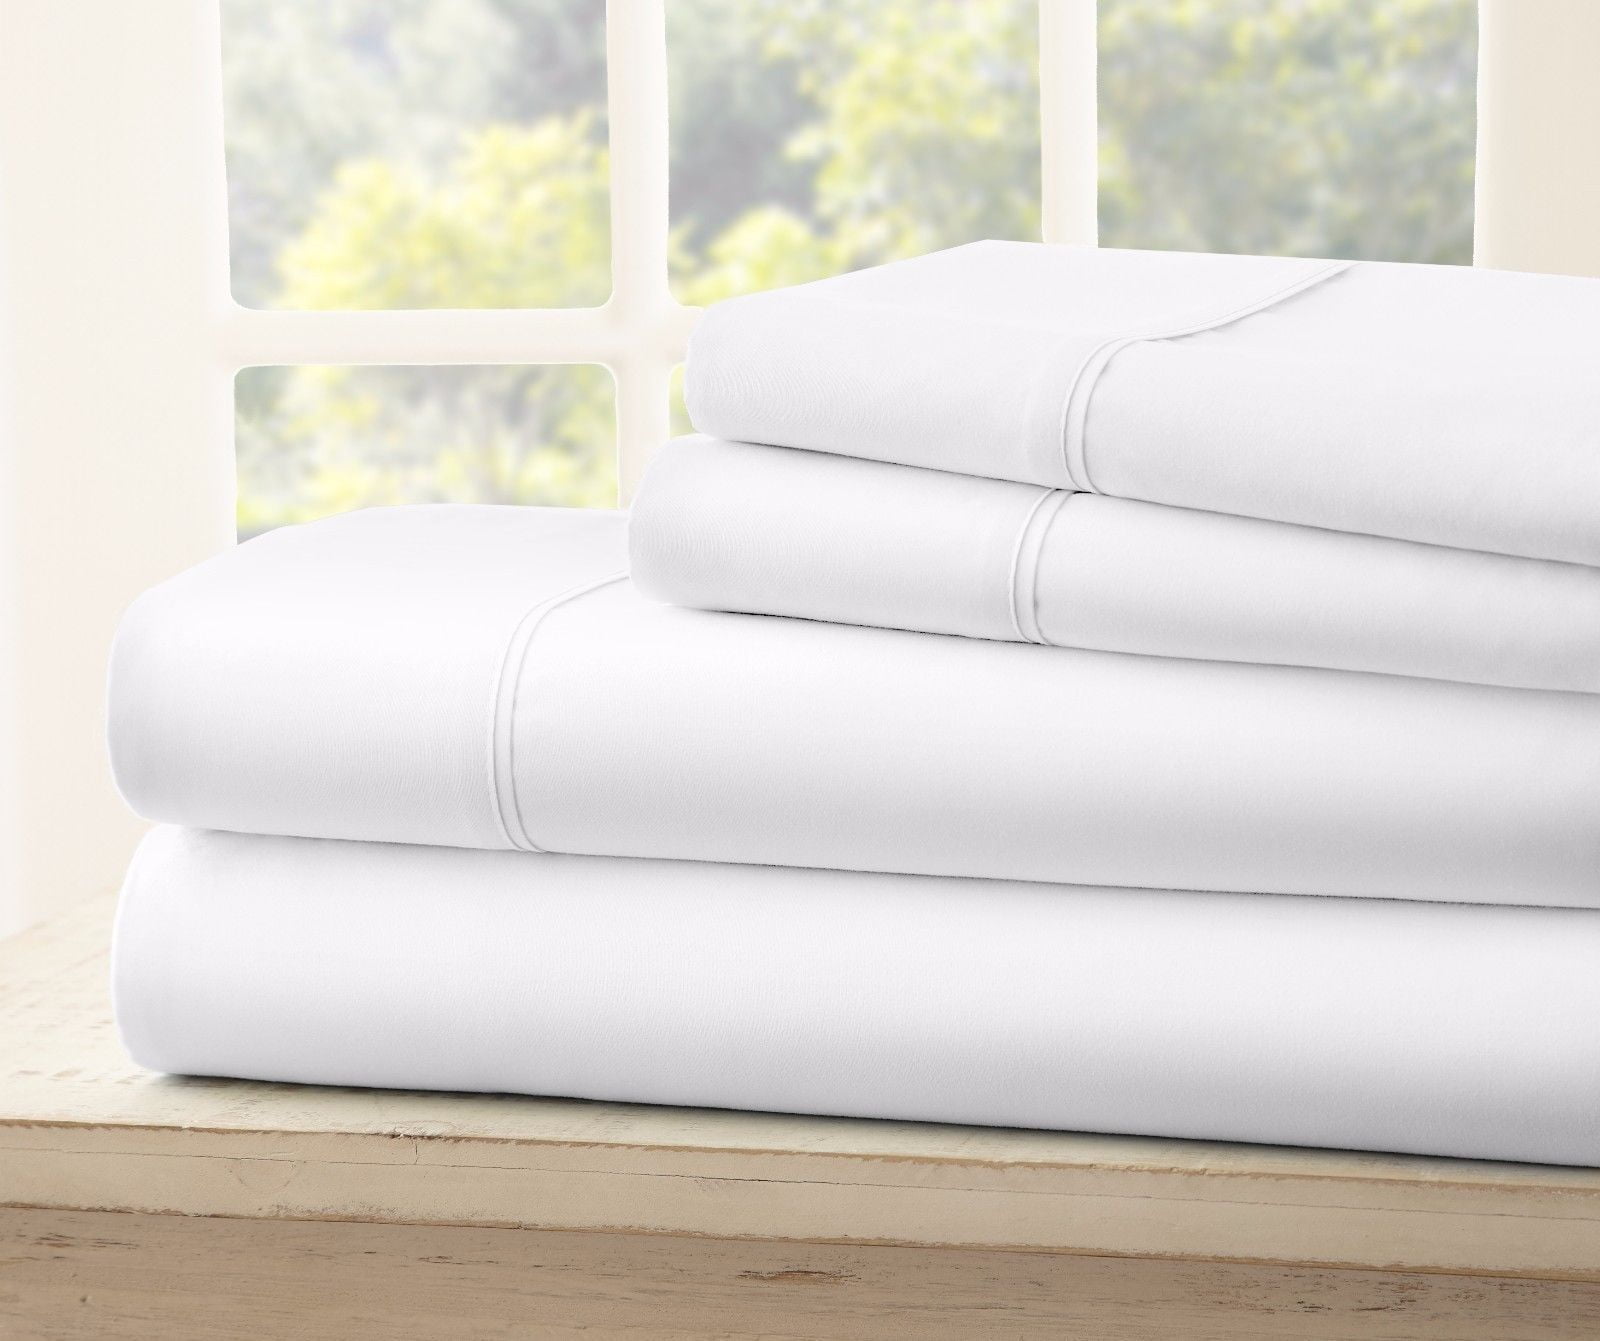 Healthy Hypoallergenic and Antibacterial Eco Friendly Cool Comfortable Ultra Soft Silky Bamboo Bedding Sheets-Wrinkl Natural Bamboo Viscose Rayon Blend Solid Double/Full 6-Piece Bed Sheets Set with 15 inch Extra Deep Pockets Bed Sheets Set by Bamboo Home